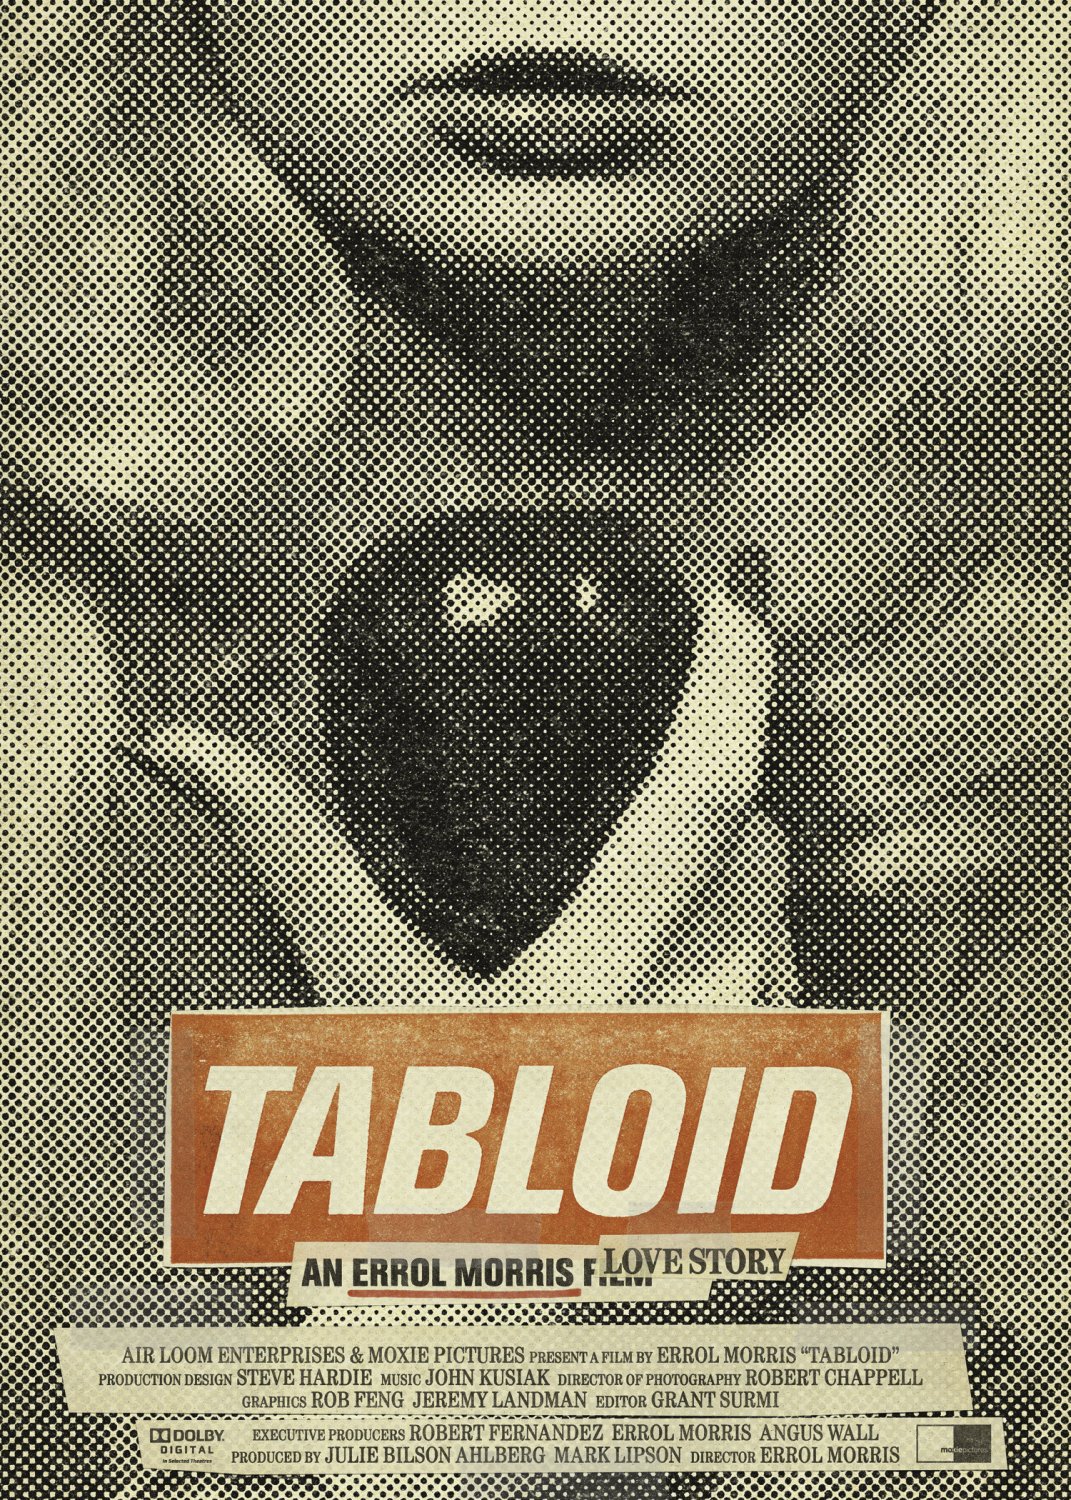 Extra Large Movie Poster Image for Tabloid 